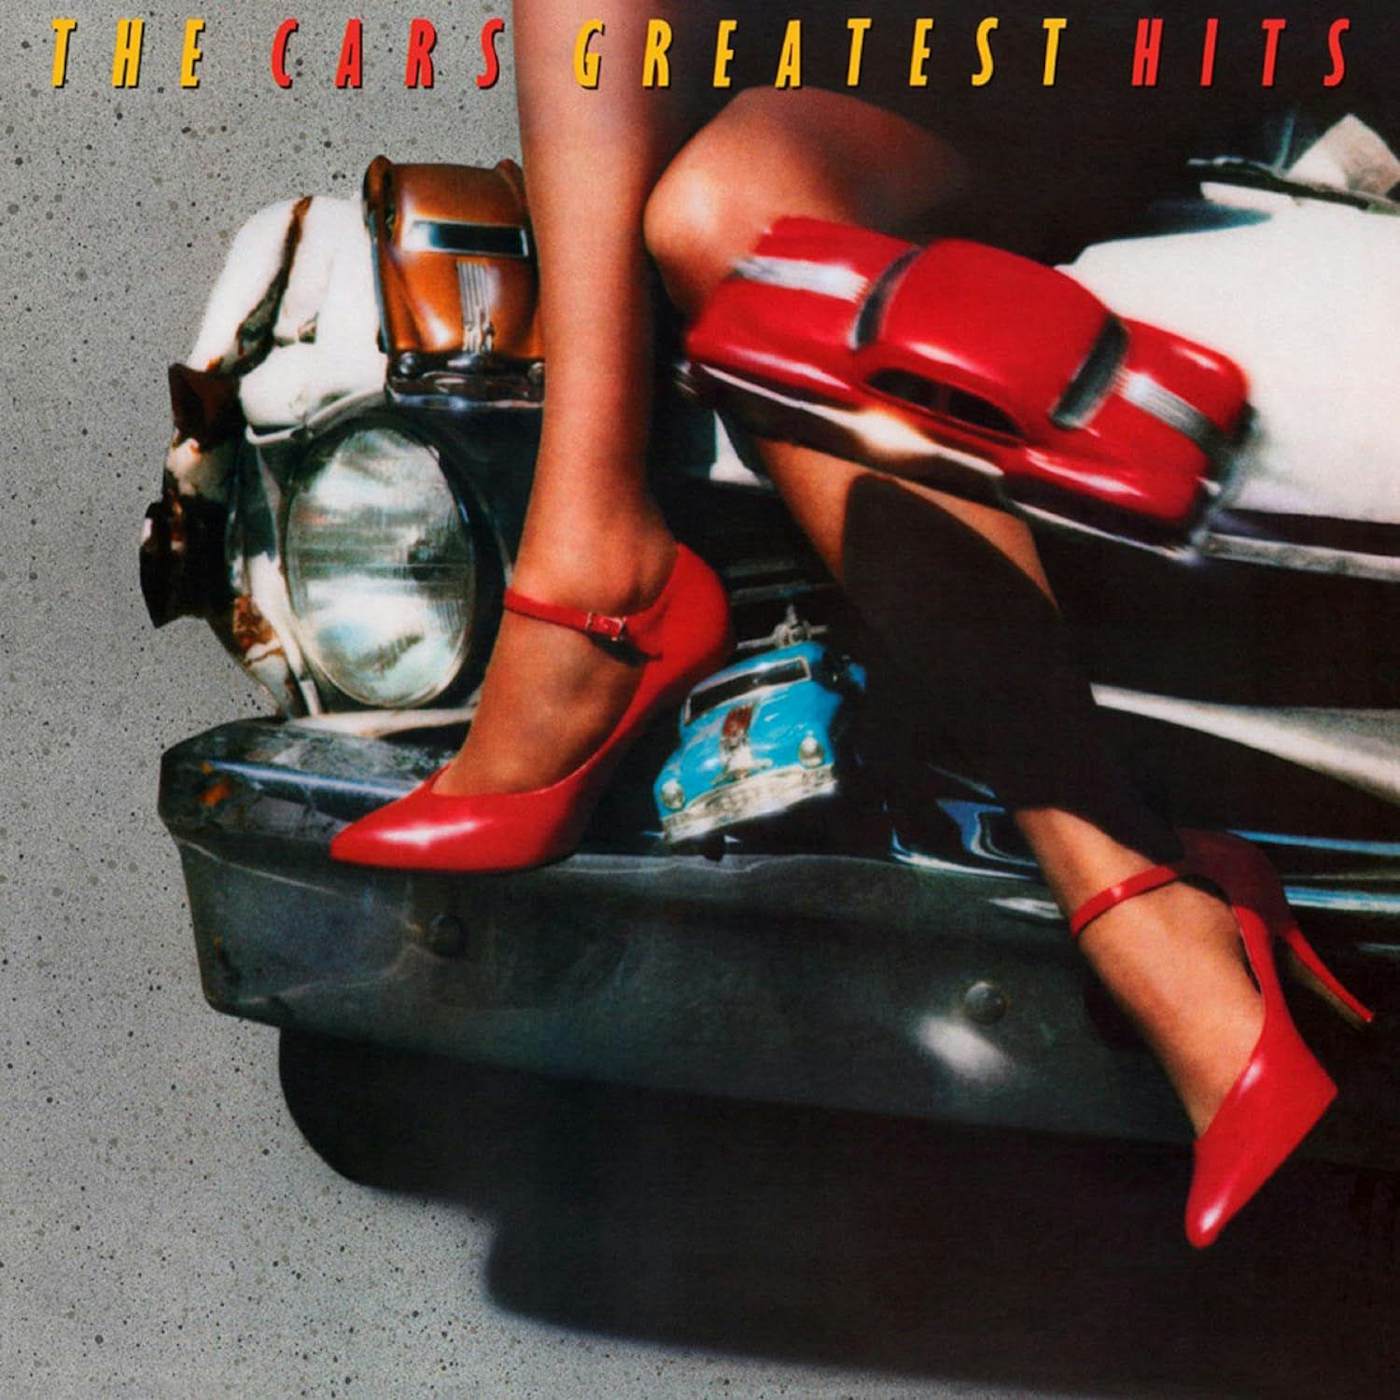 The Cars Greatest Hits (Limited Edition) Vinyl Record